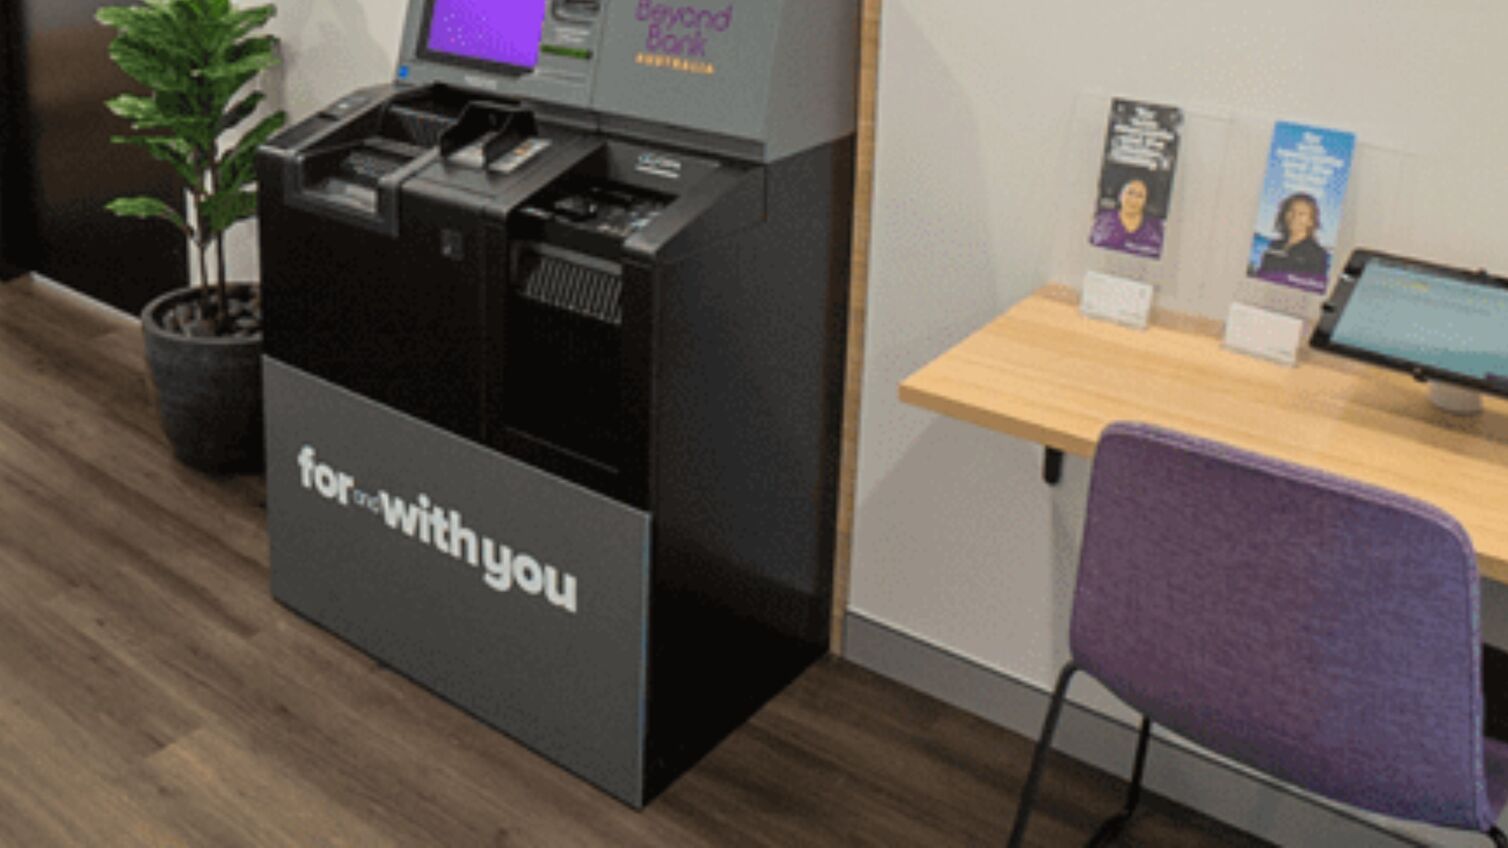 Gloria, the self service cash transaction tool located in a Beyond Bank branch